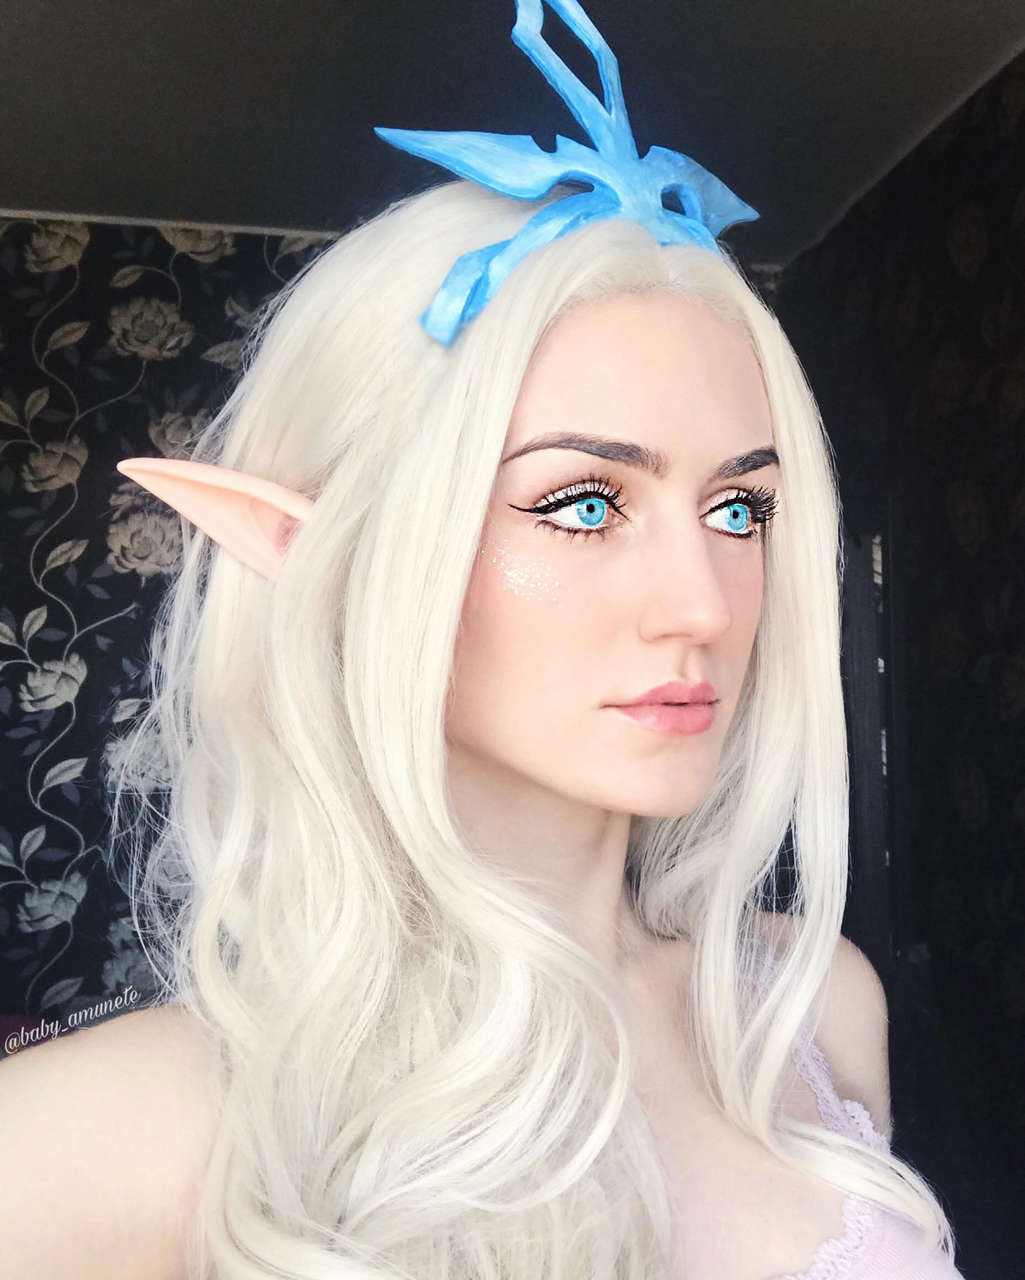 Original Janna Inspired Cosplay By Baby Amunete Sel